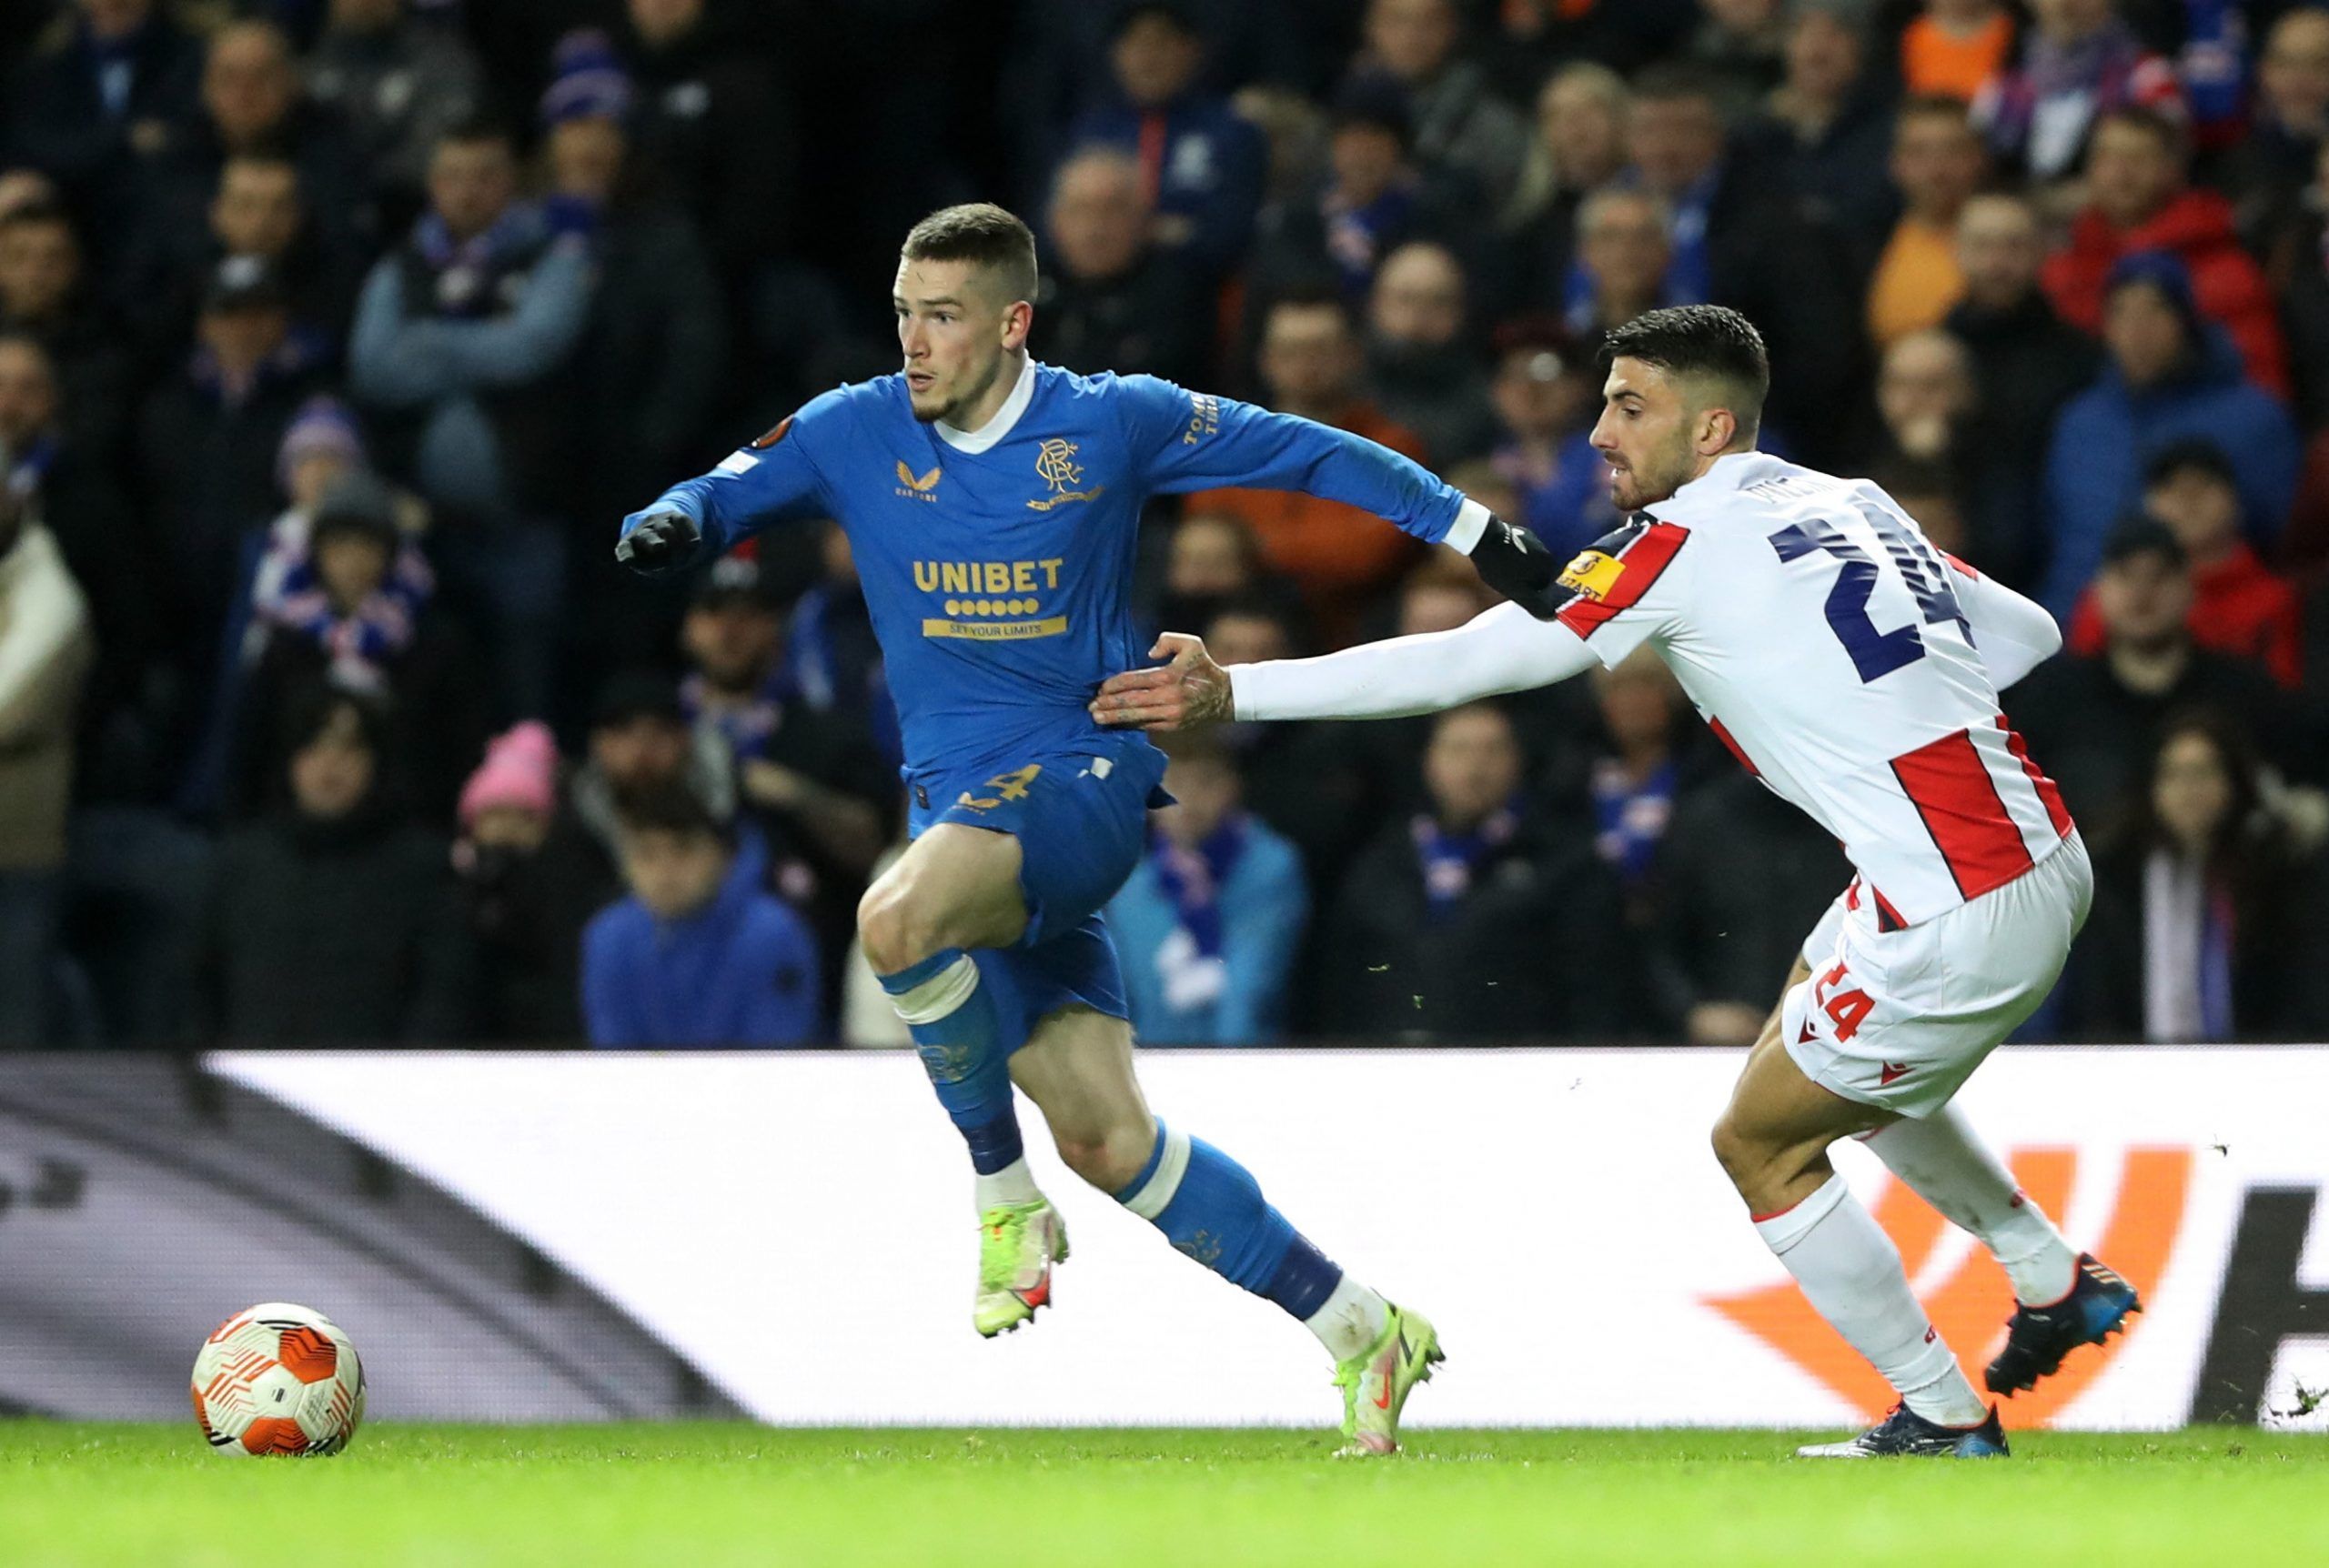 Soccer Football - Europa League - Round of 16 First Leg - Rangers v Crvena Zvezda - Ibrox, Glasgow, Scotland, Britain - March 10, 2022 Rangers' Ryan Kent in action with Crvena Zvezda's Cristiano Piccini REUTERS/Russell Cheyne